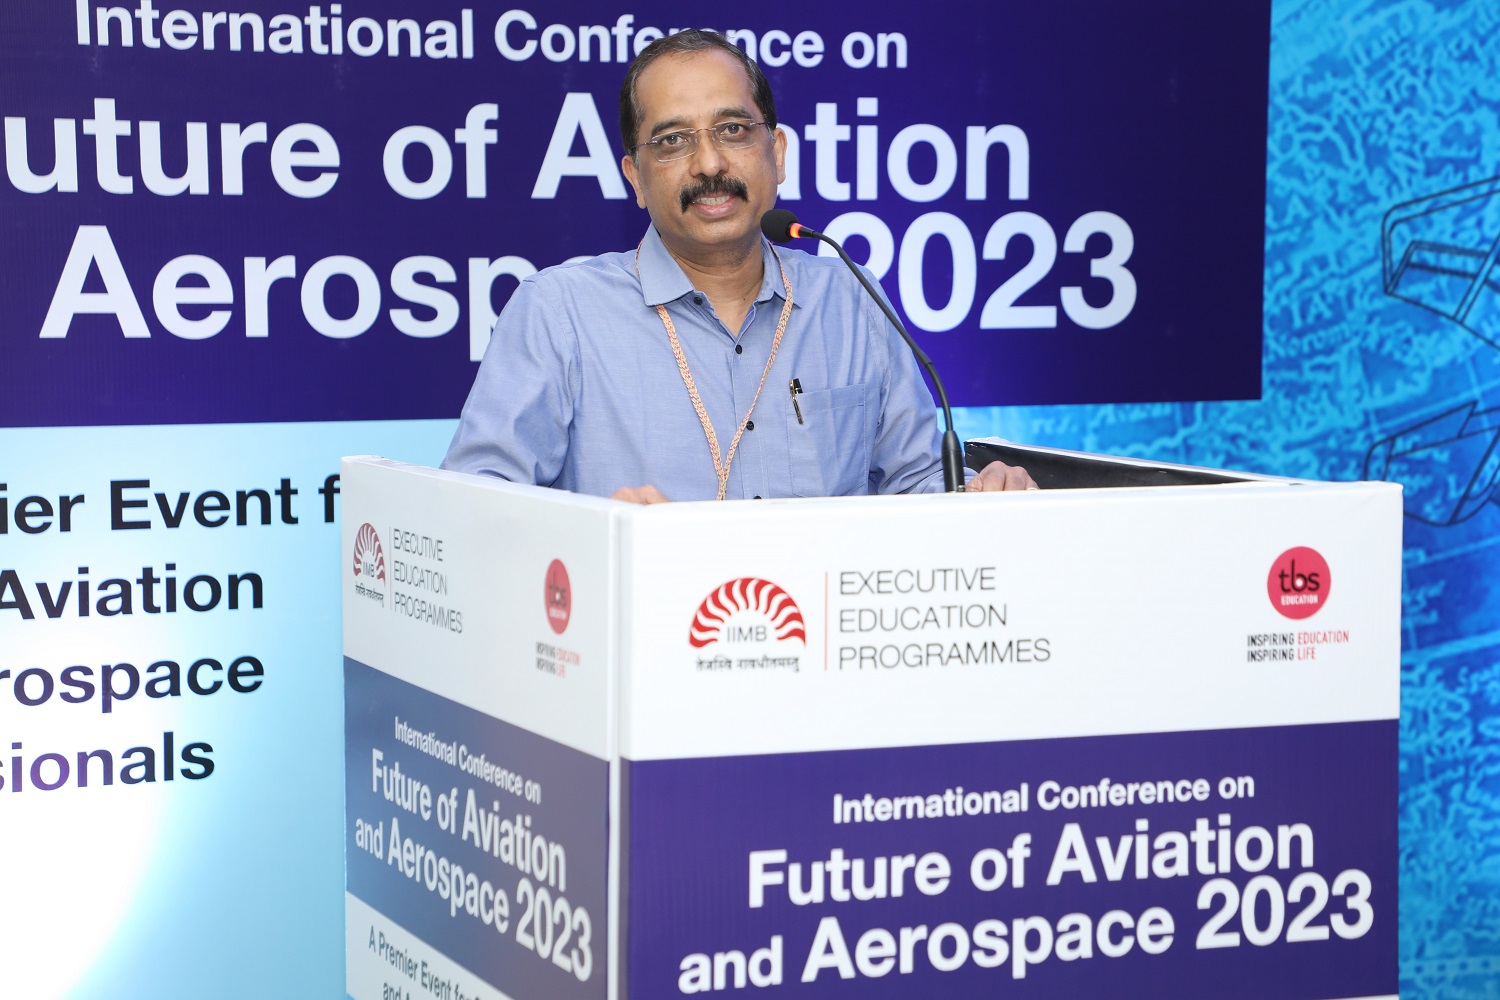 Prof. G Shainesh, Chairperson, Executive Education Programmes, welcomes the speakers and participants to the ‘International Conference on Future of Aviation & Aerospace 2023’, organized by IIMB's Executive Education Programmes with Toulouse Business School, on April 8, 2023.